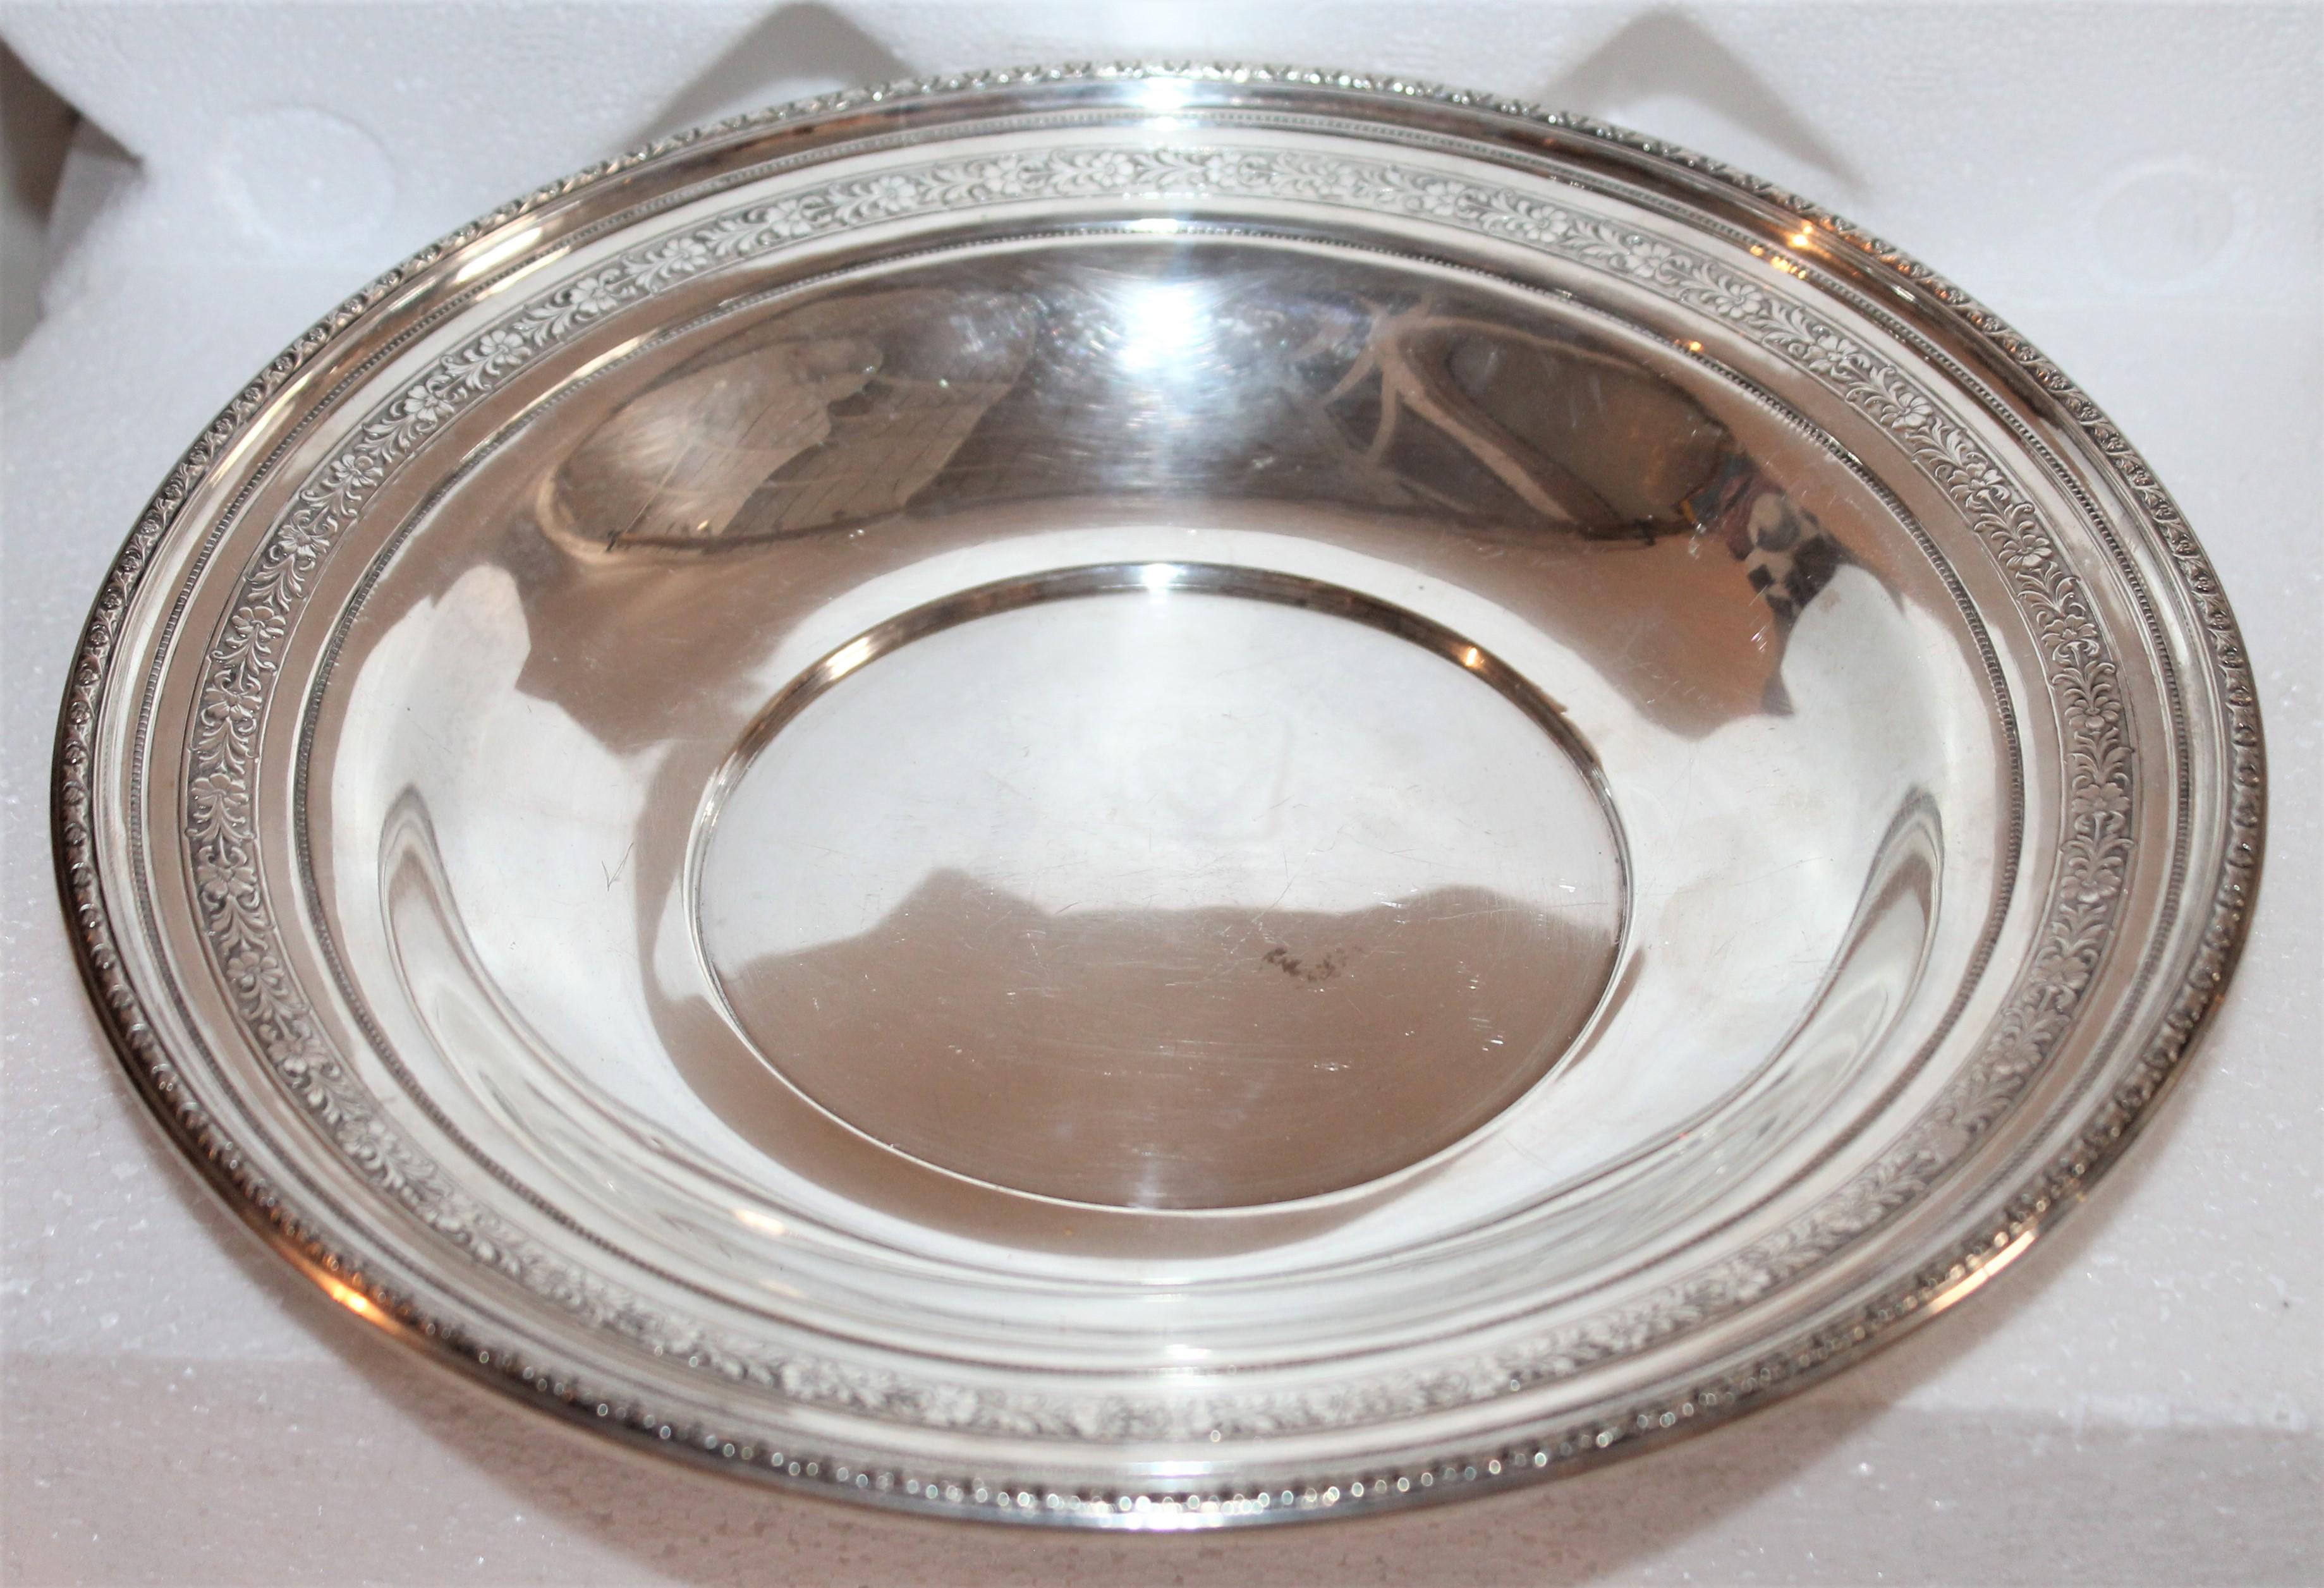 Black star and Gorham sterling silver platter - Both sterling silver serving bowls have good weight and in good condition.
Measures: 10.5 diameter x 1 depth
Virginia carvel sterling silver pat September 39, 1924
Measures: 10 diameter x 1.5 depth.